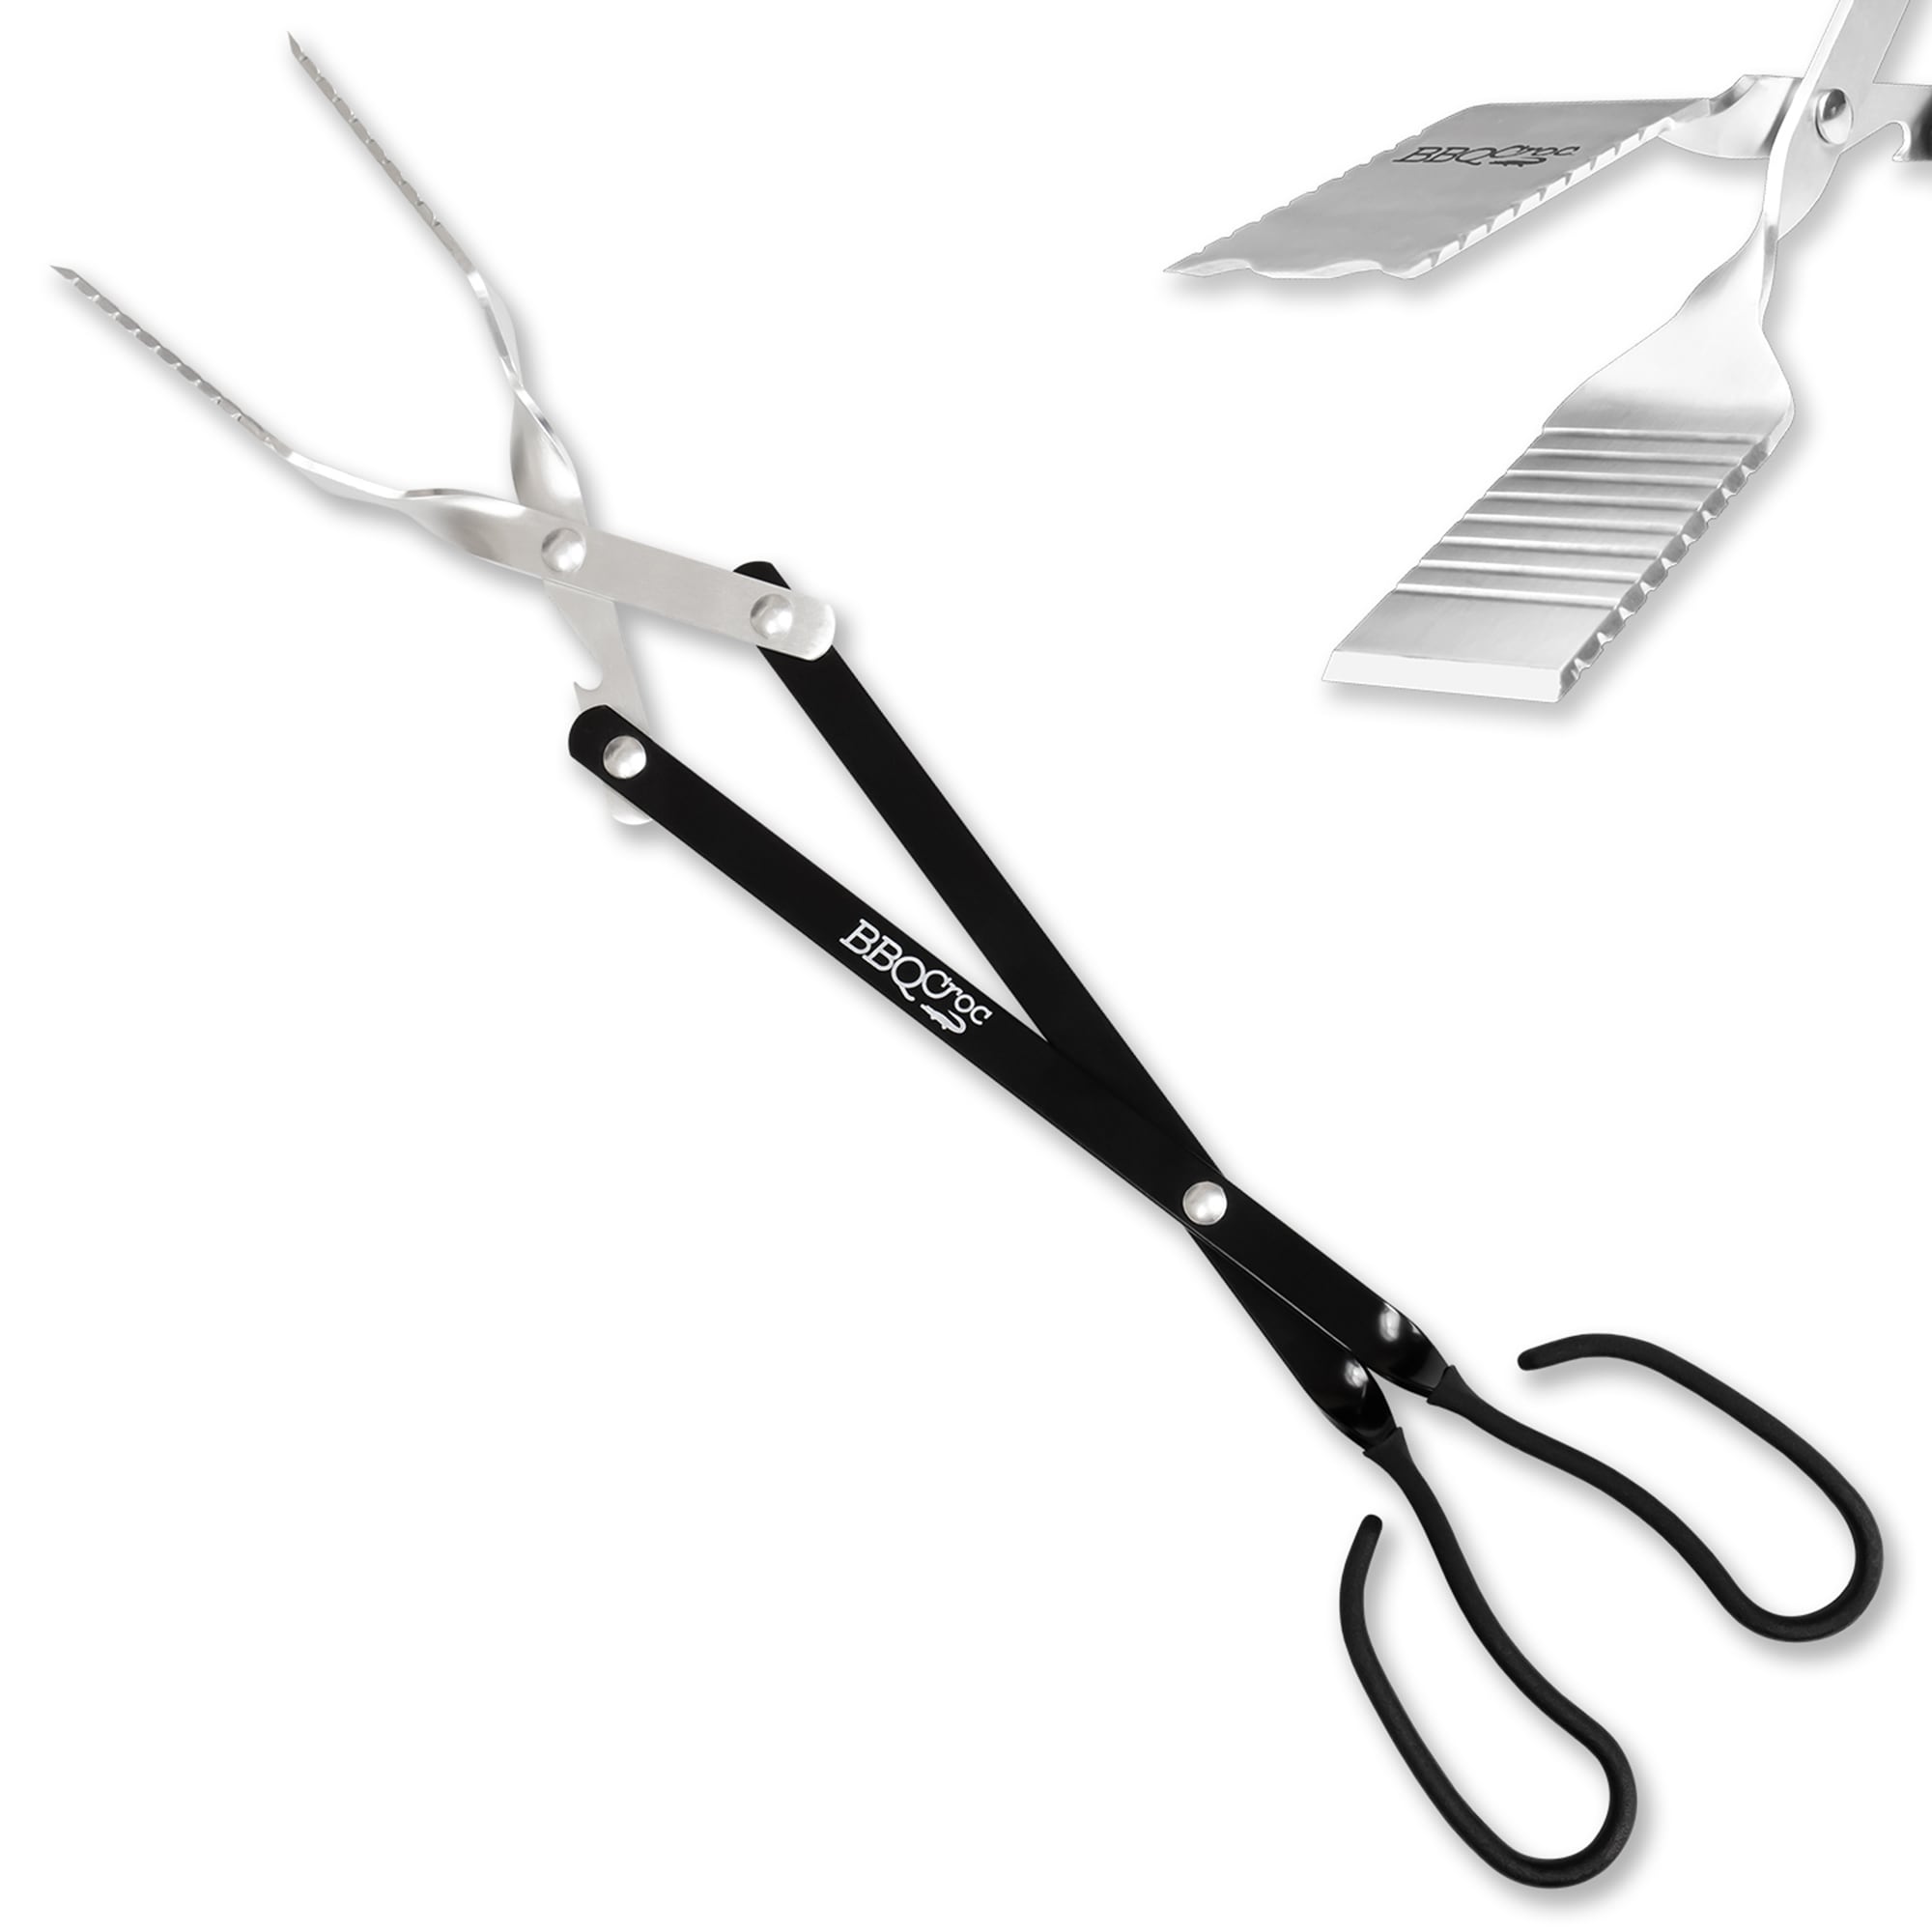 Gourmet Herb Scissors Set - Master Culinary Multipurpose Cutting Shears  With Stainless Steel 5 Blades, Stripping Tool, Safety Cover And Cleaning  Comb